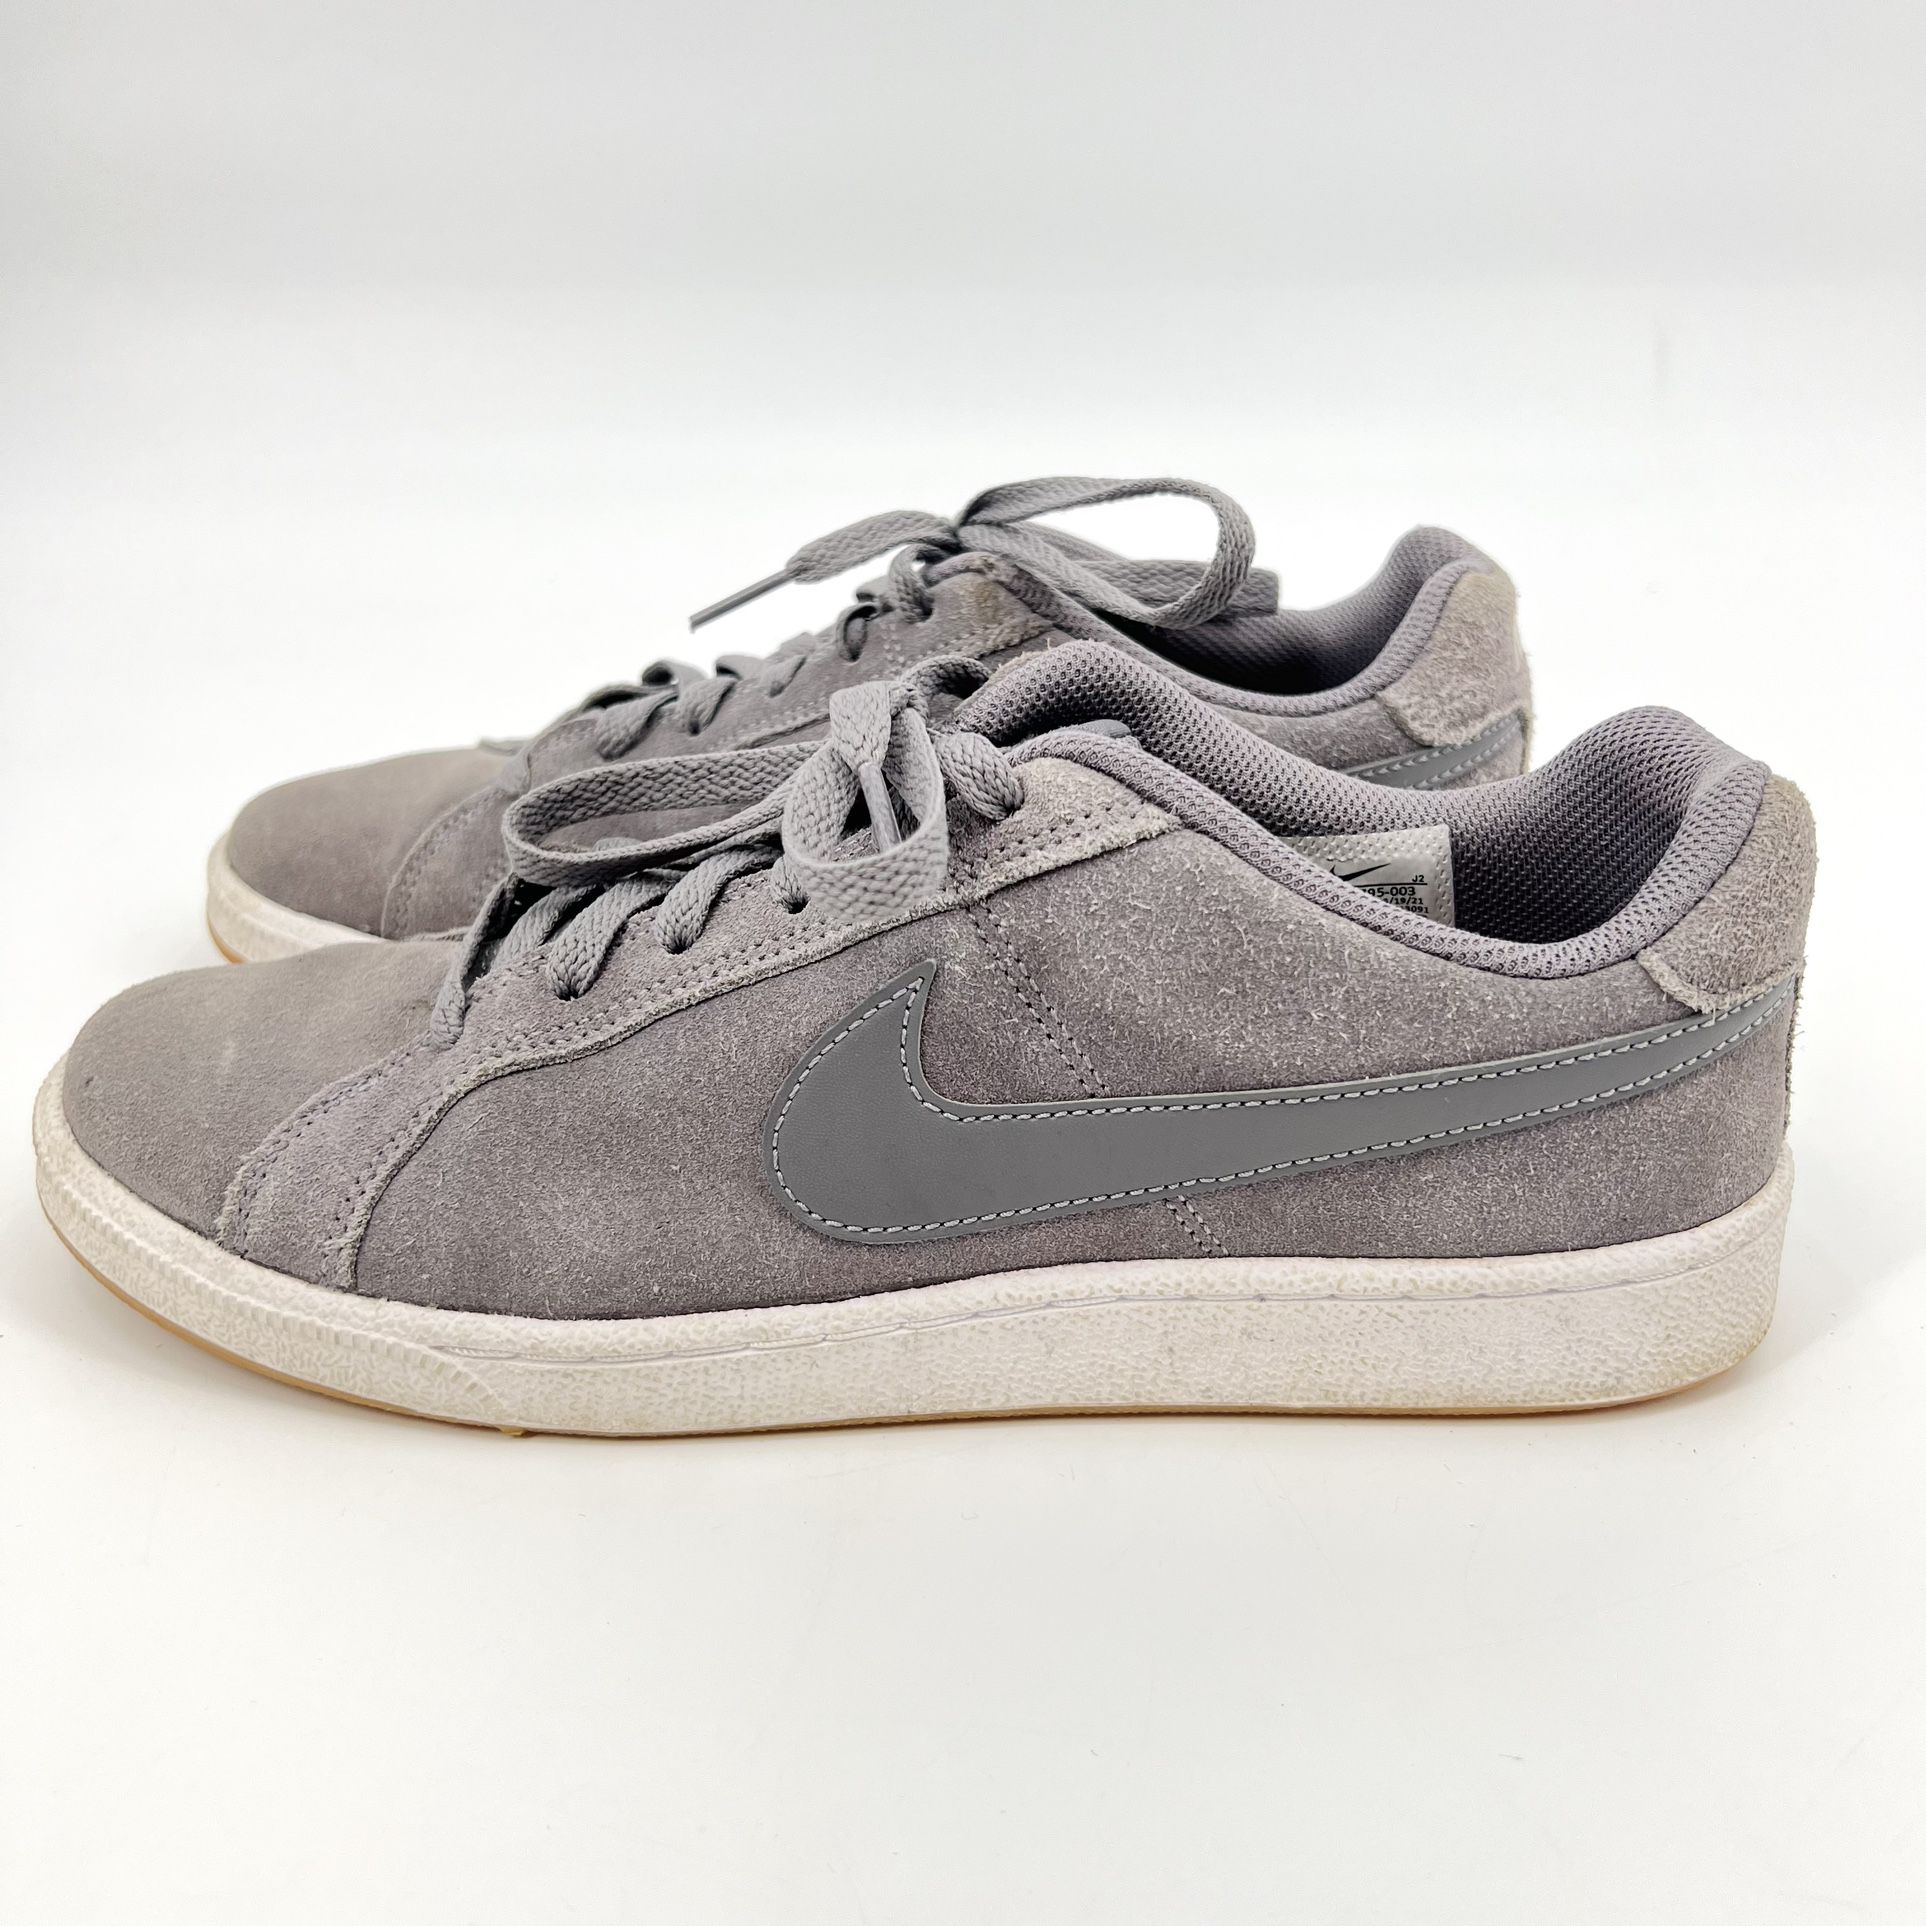 Nike Women's Court Royale Gray Suede Lace Up Shoes Women’s 9